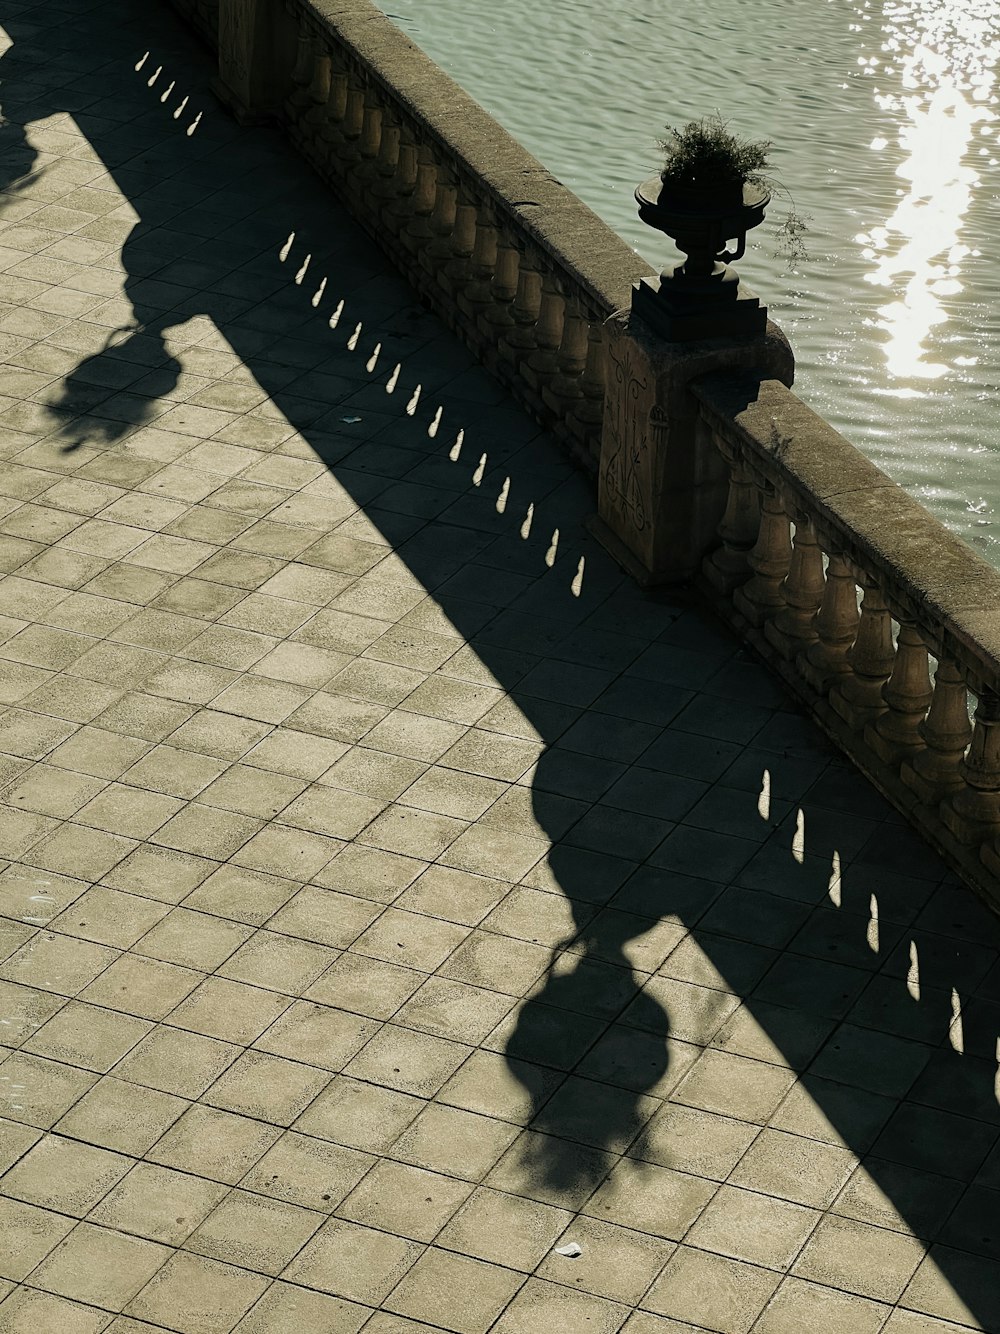 a shadow of a person standing on a sidewalk next to a body of water